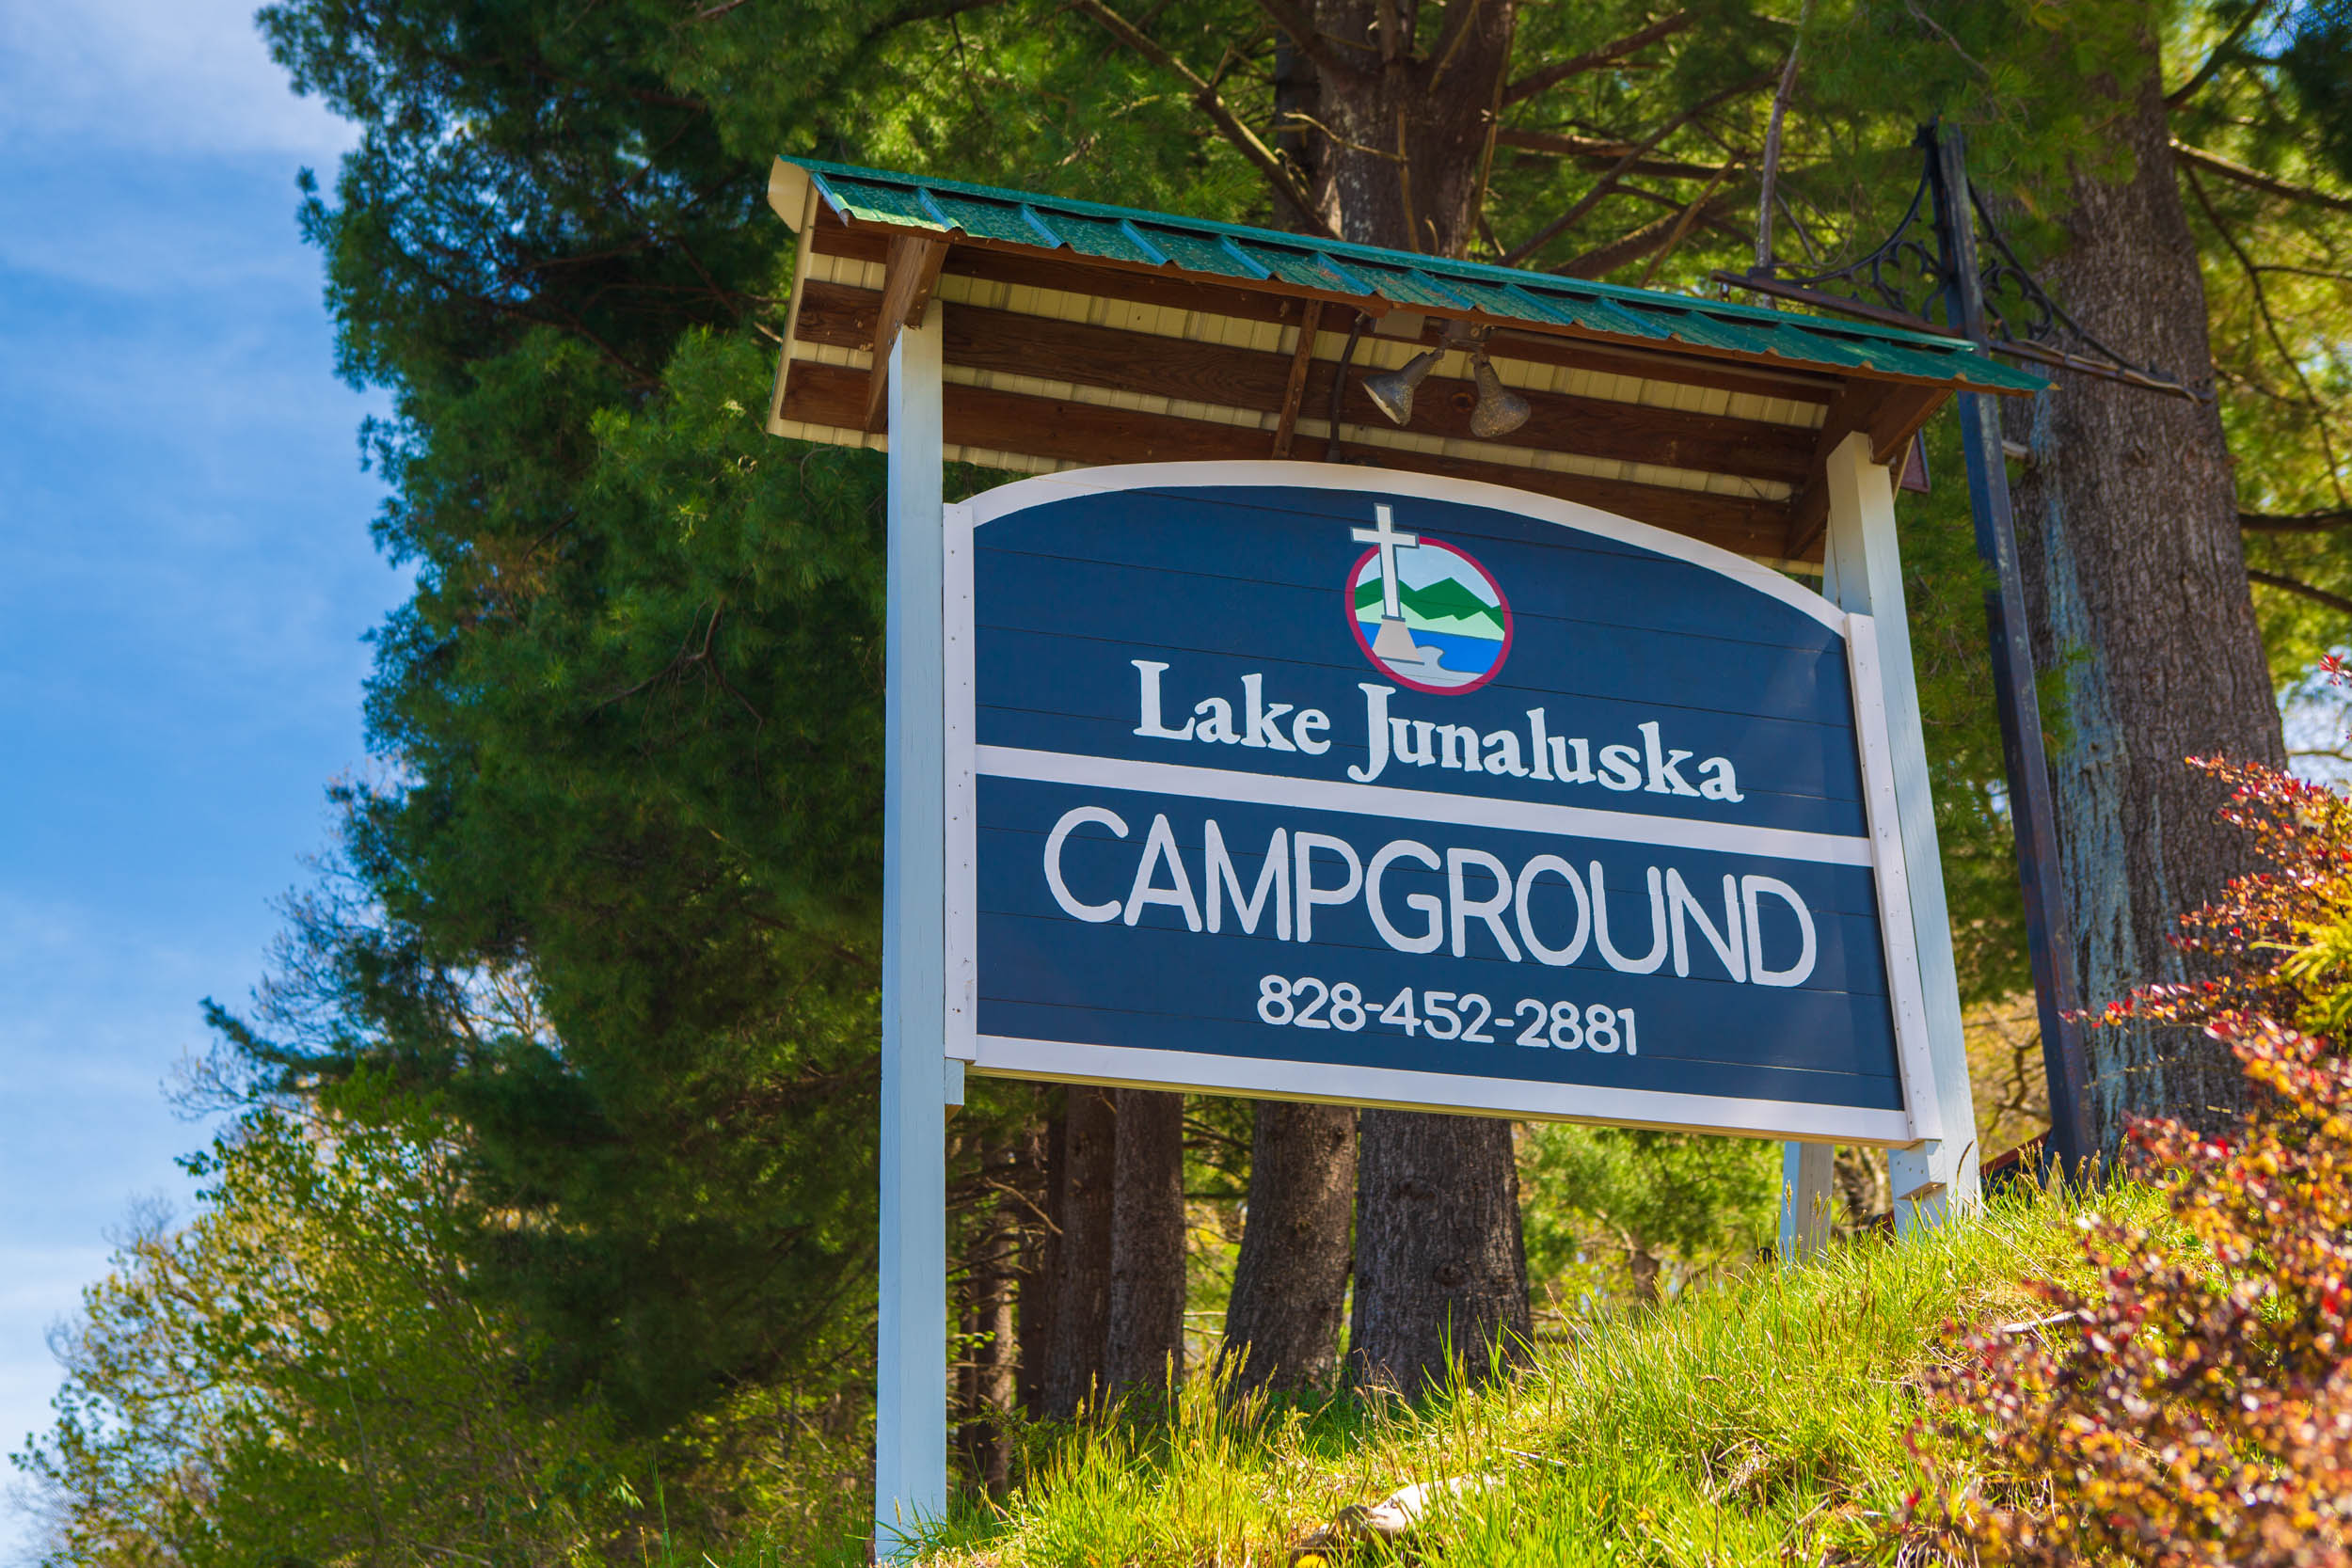 Photo of Lake Junaluska Campground sign with reservations phone number: 828-452-2881